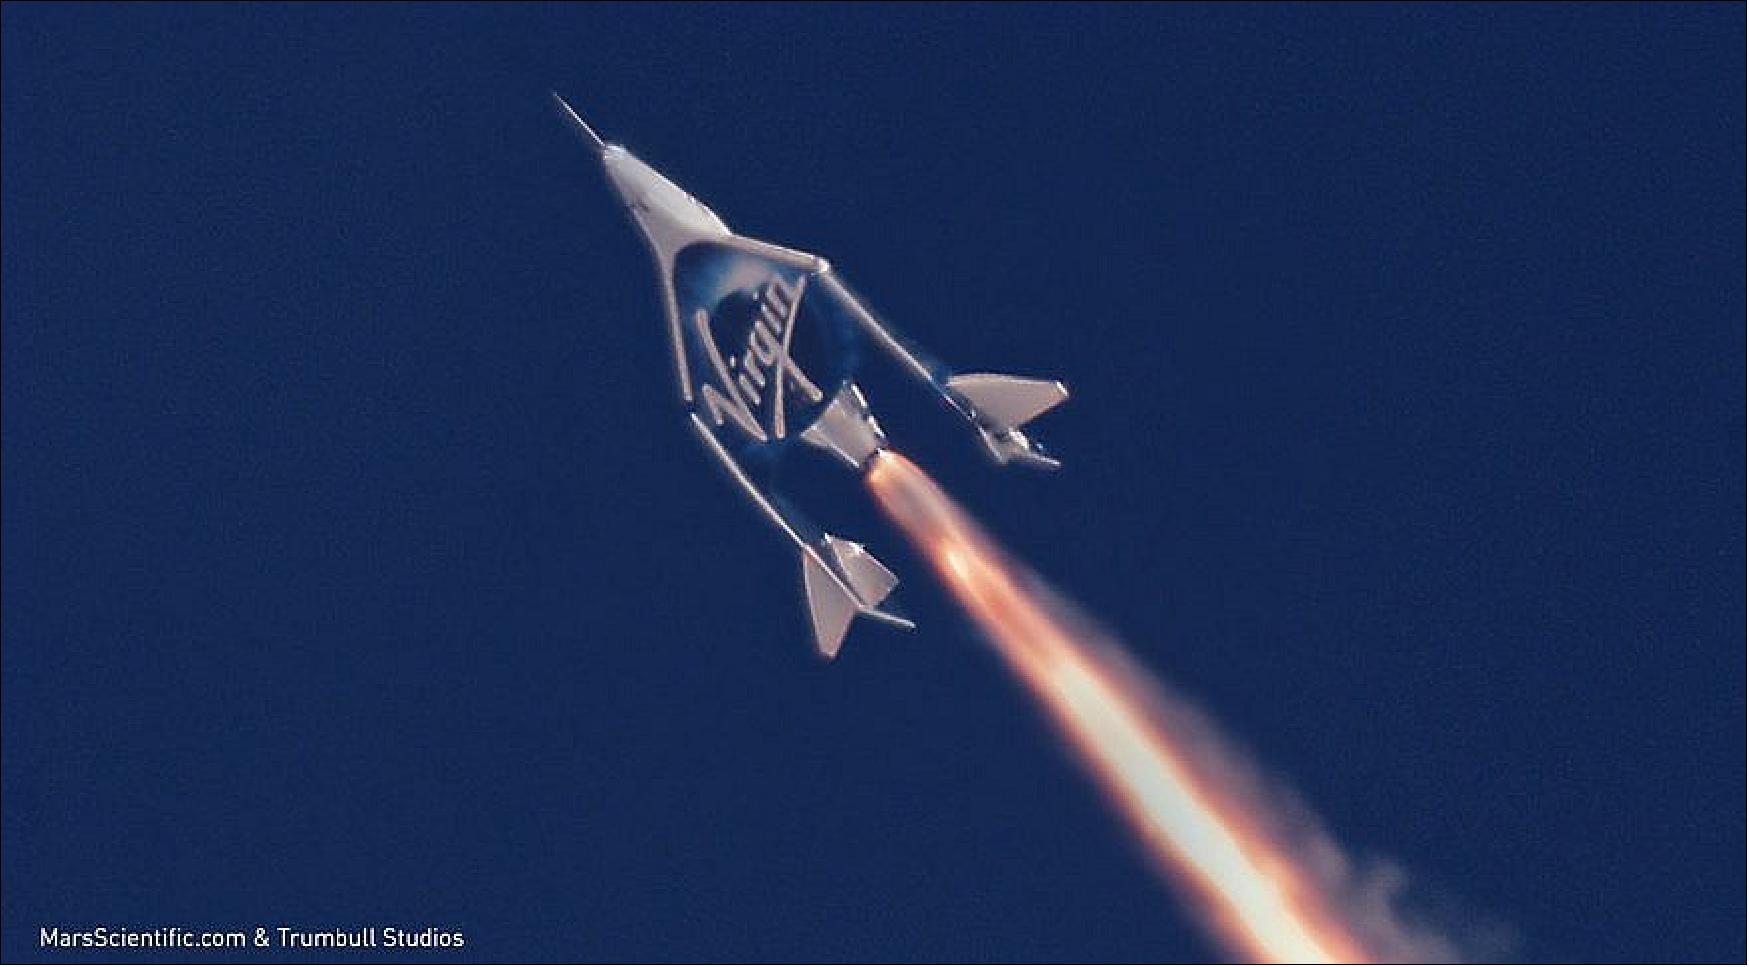 Figure 6: Virgin Galactic says supply chain problems and hiring issues will push back the start of commercial service of its VSS Unity SpaceShipTwo suborbital spaceplane from late 2022 to early 2023 (image credit: MarsScientific.com & Trumbull Studios)